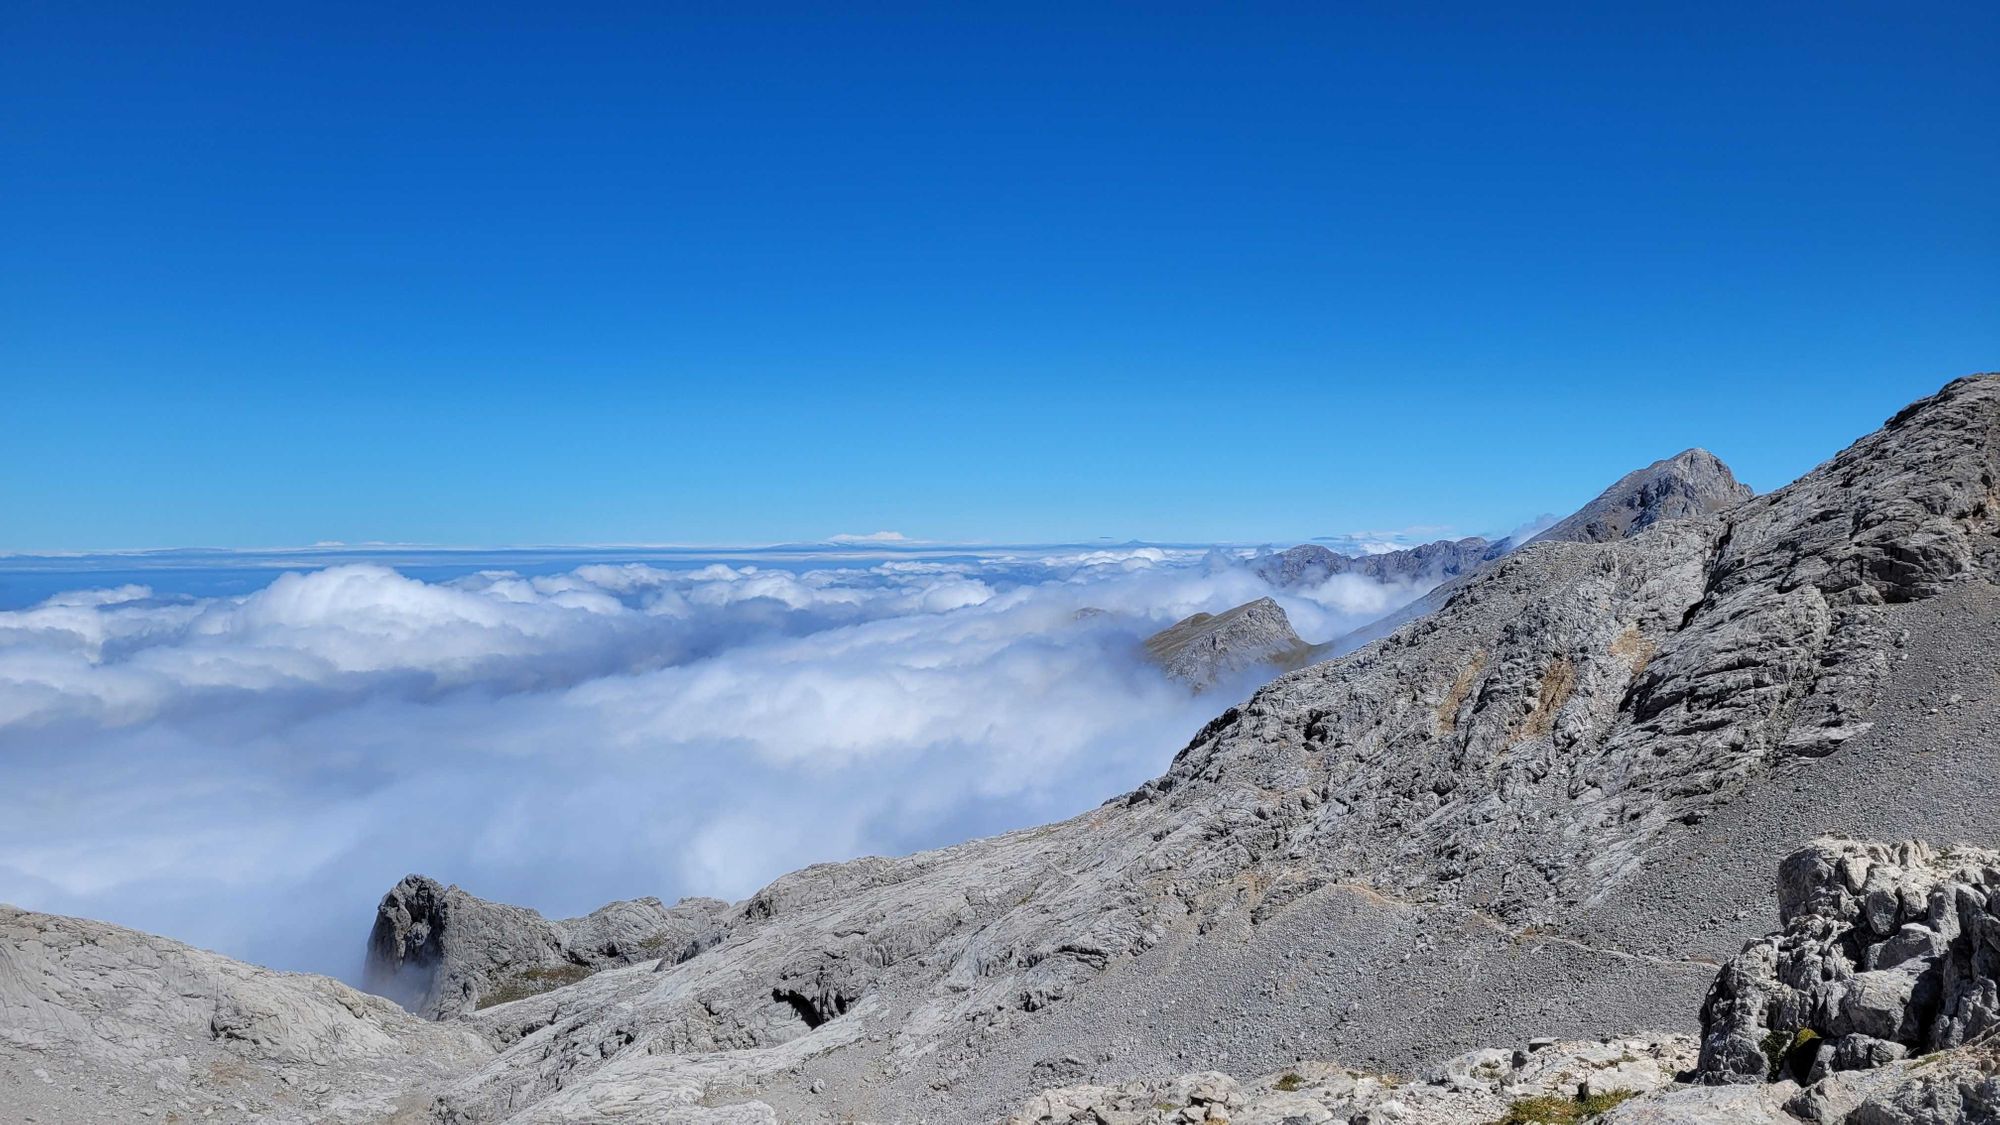 Sharp grey peaks emerging from a blanket of clouds in the Picos de Europa, Spain